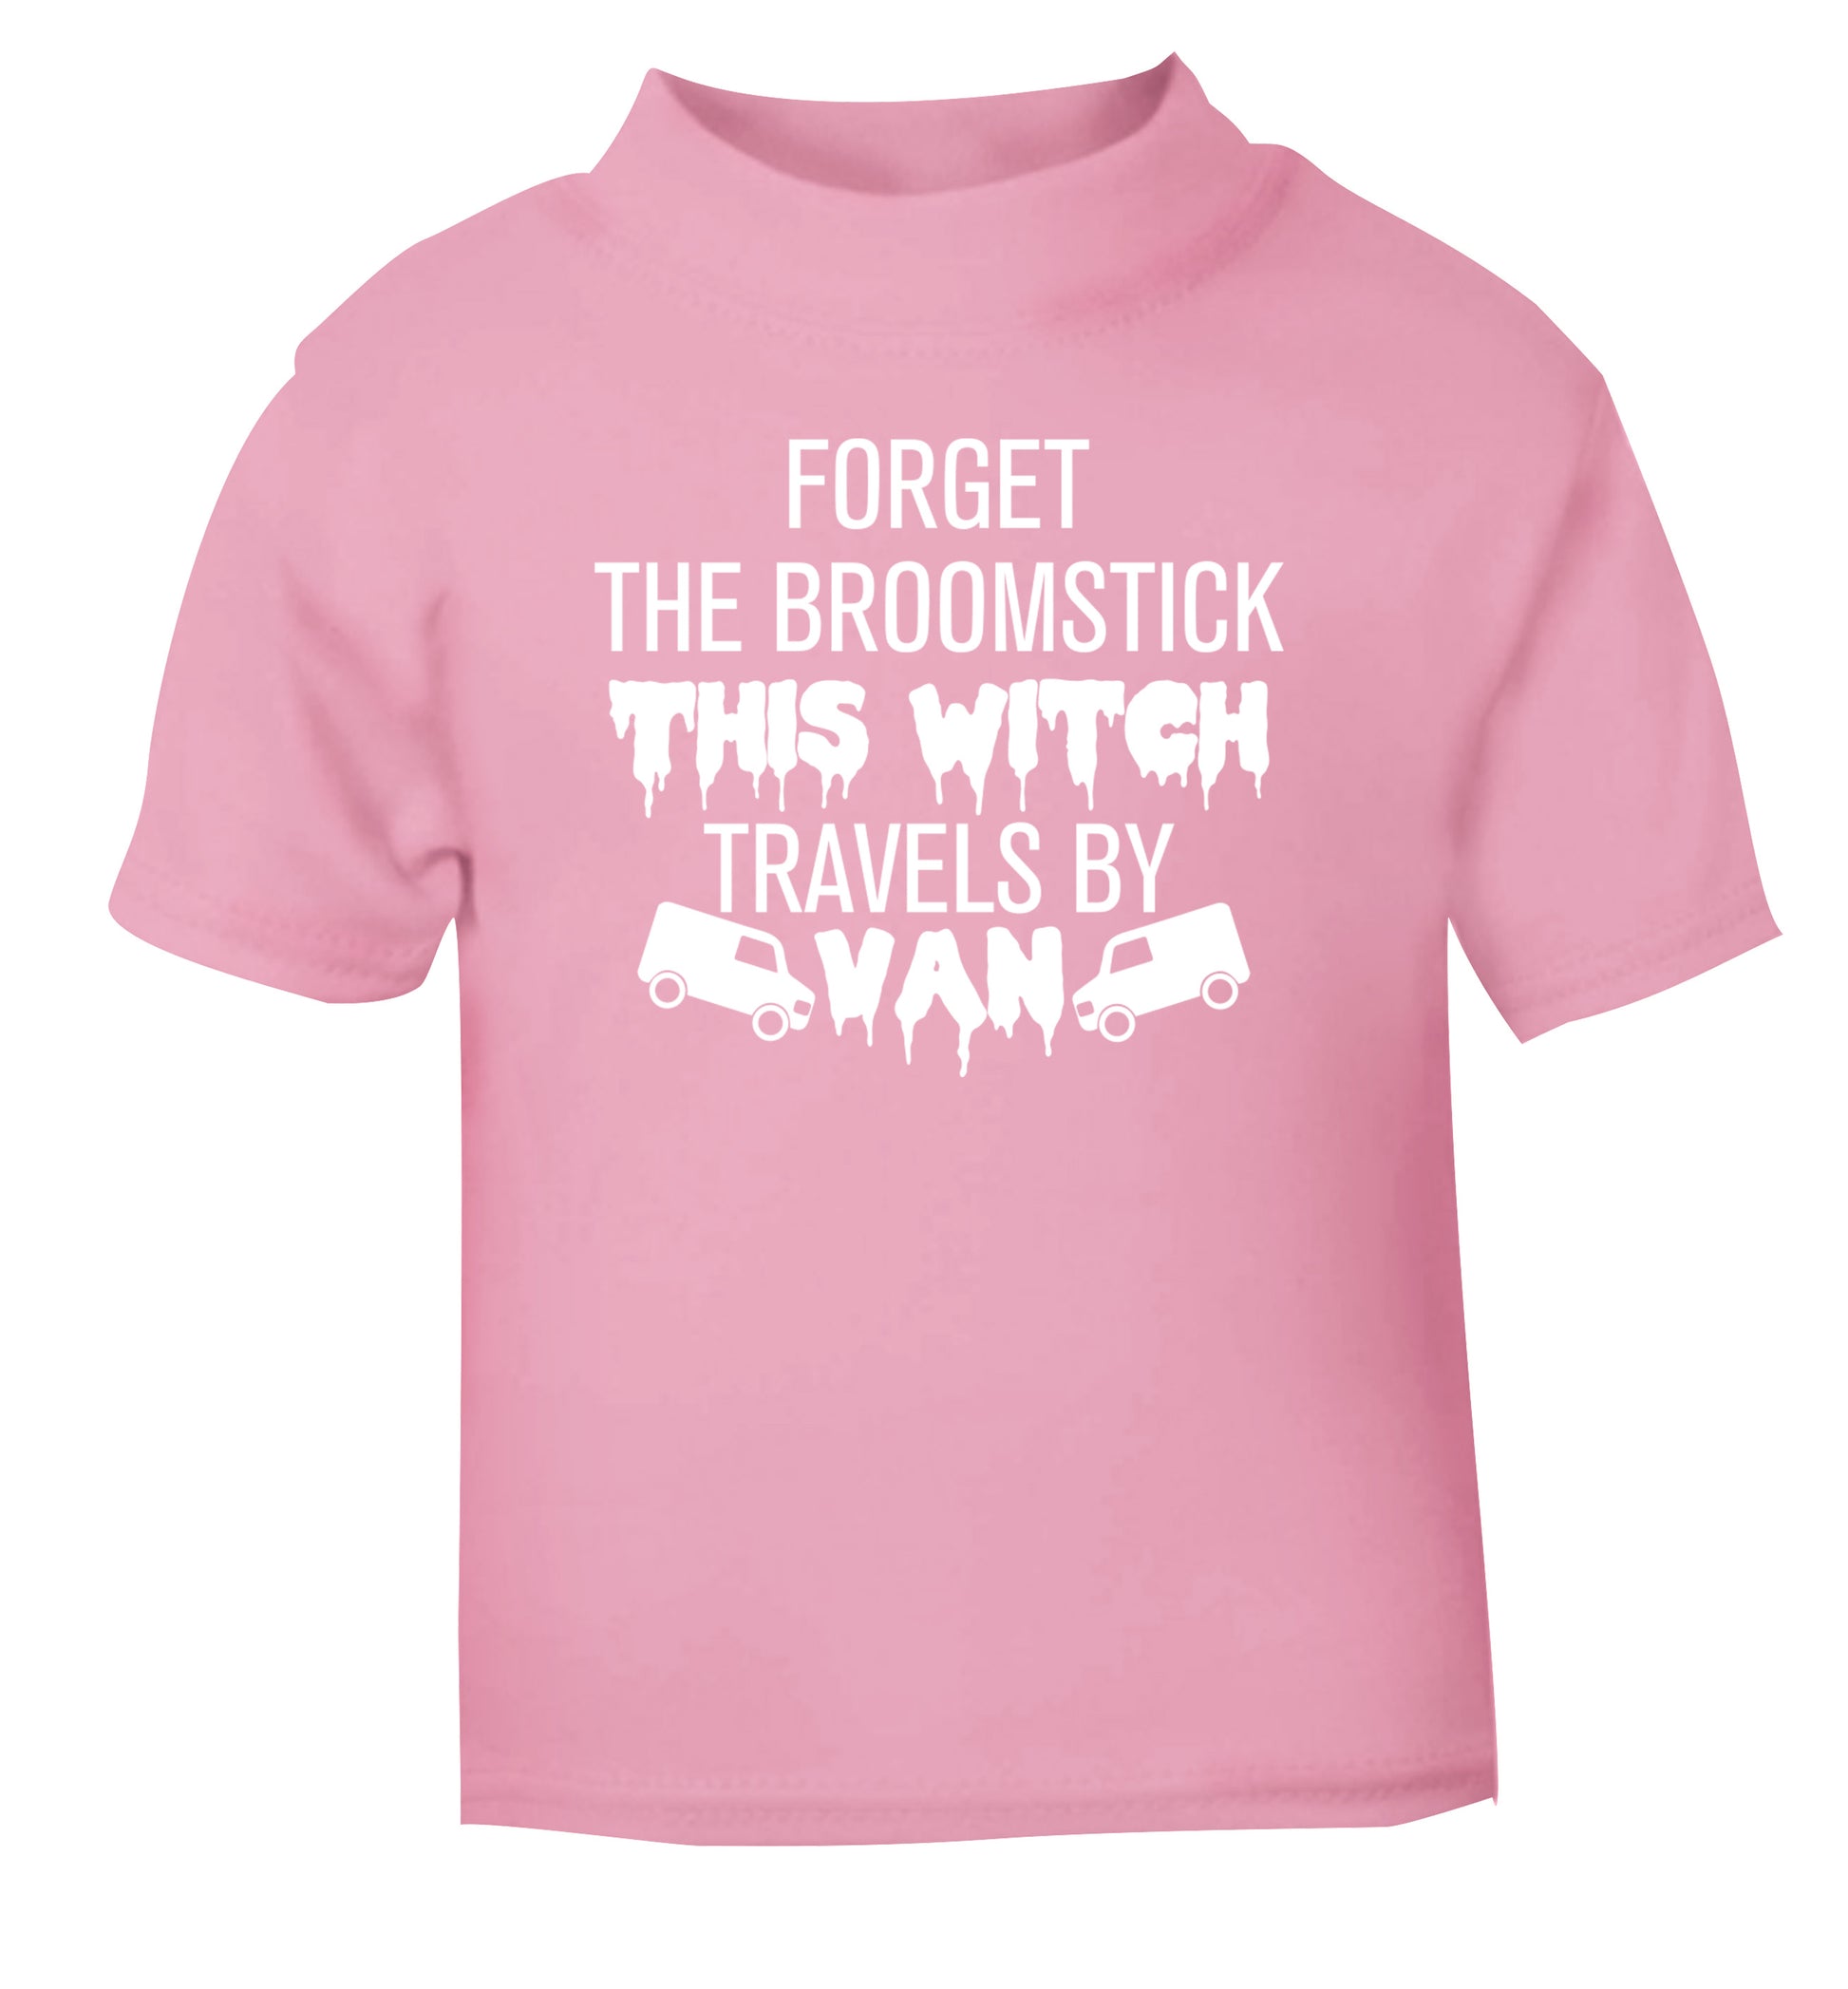 Forget the broomstick this witch travels by van light pink Baby Toddler Tshirt 2 Years